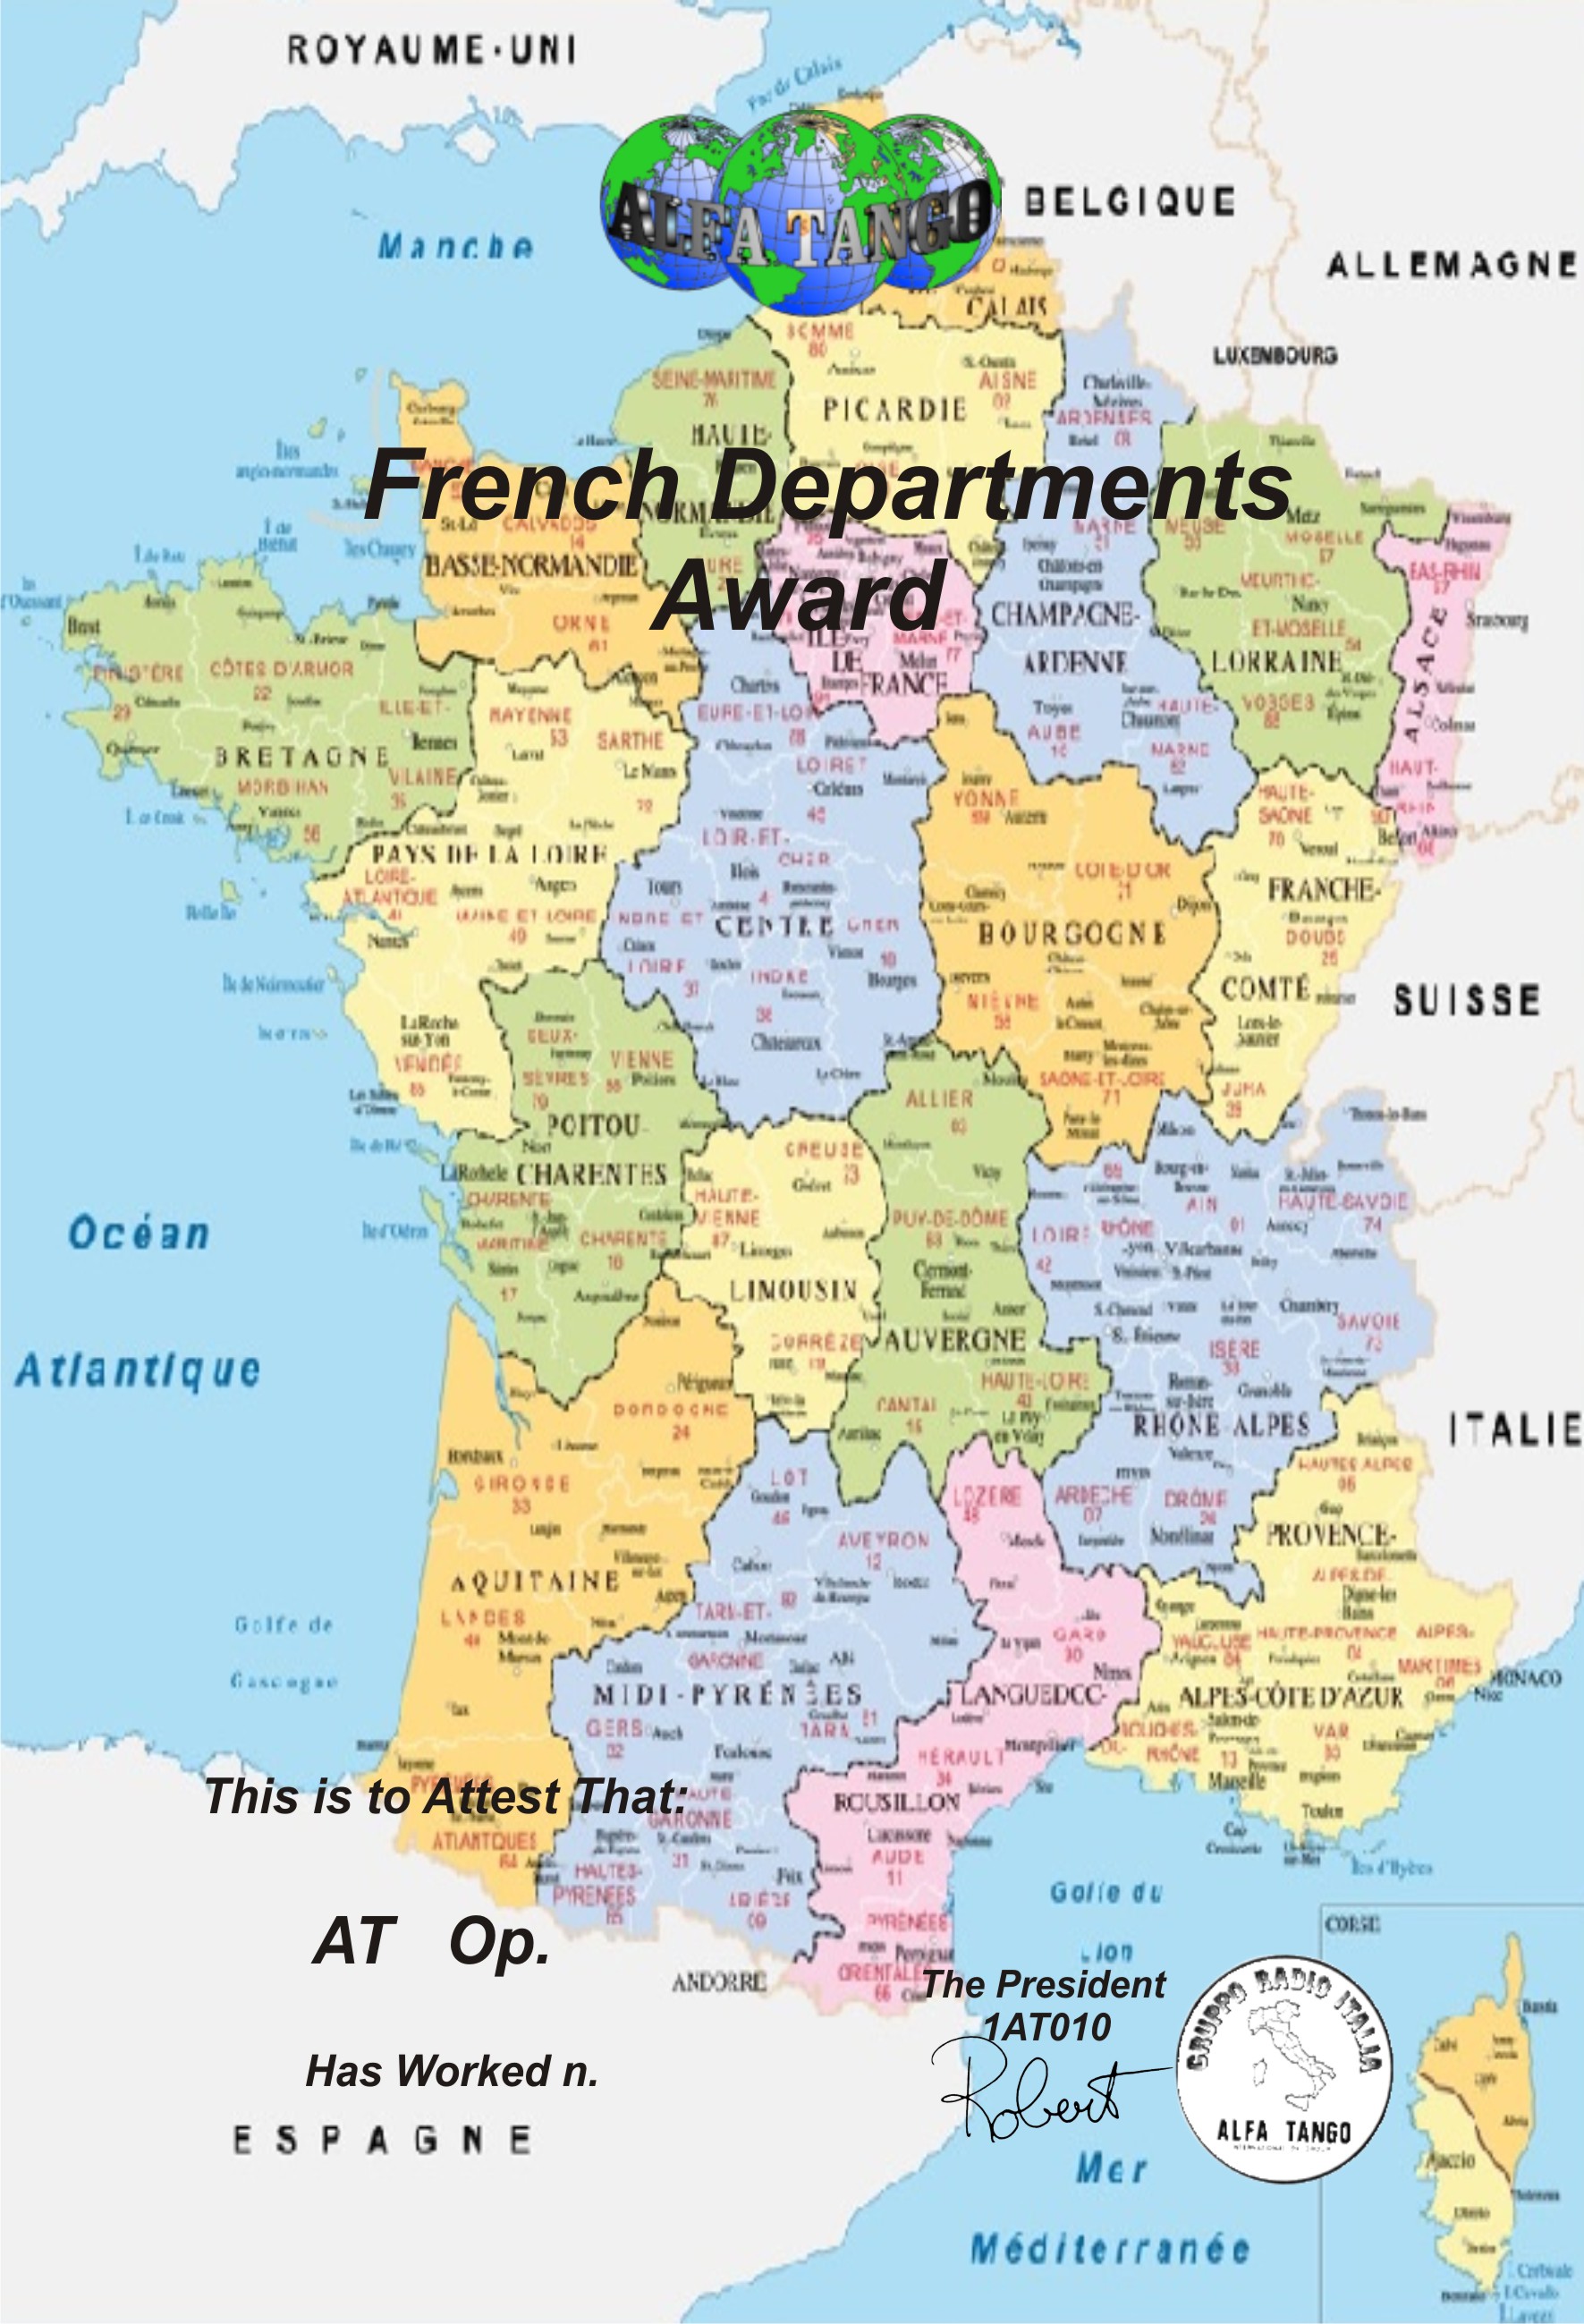 25_French_Departments_Awards.jpg